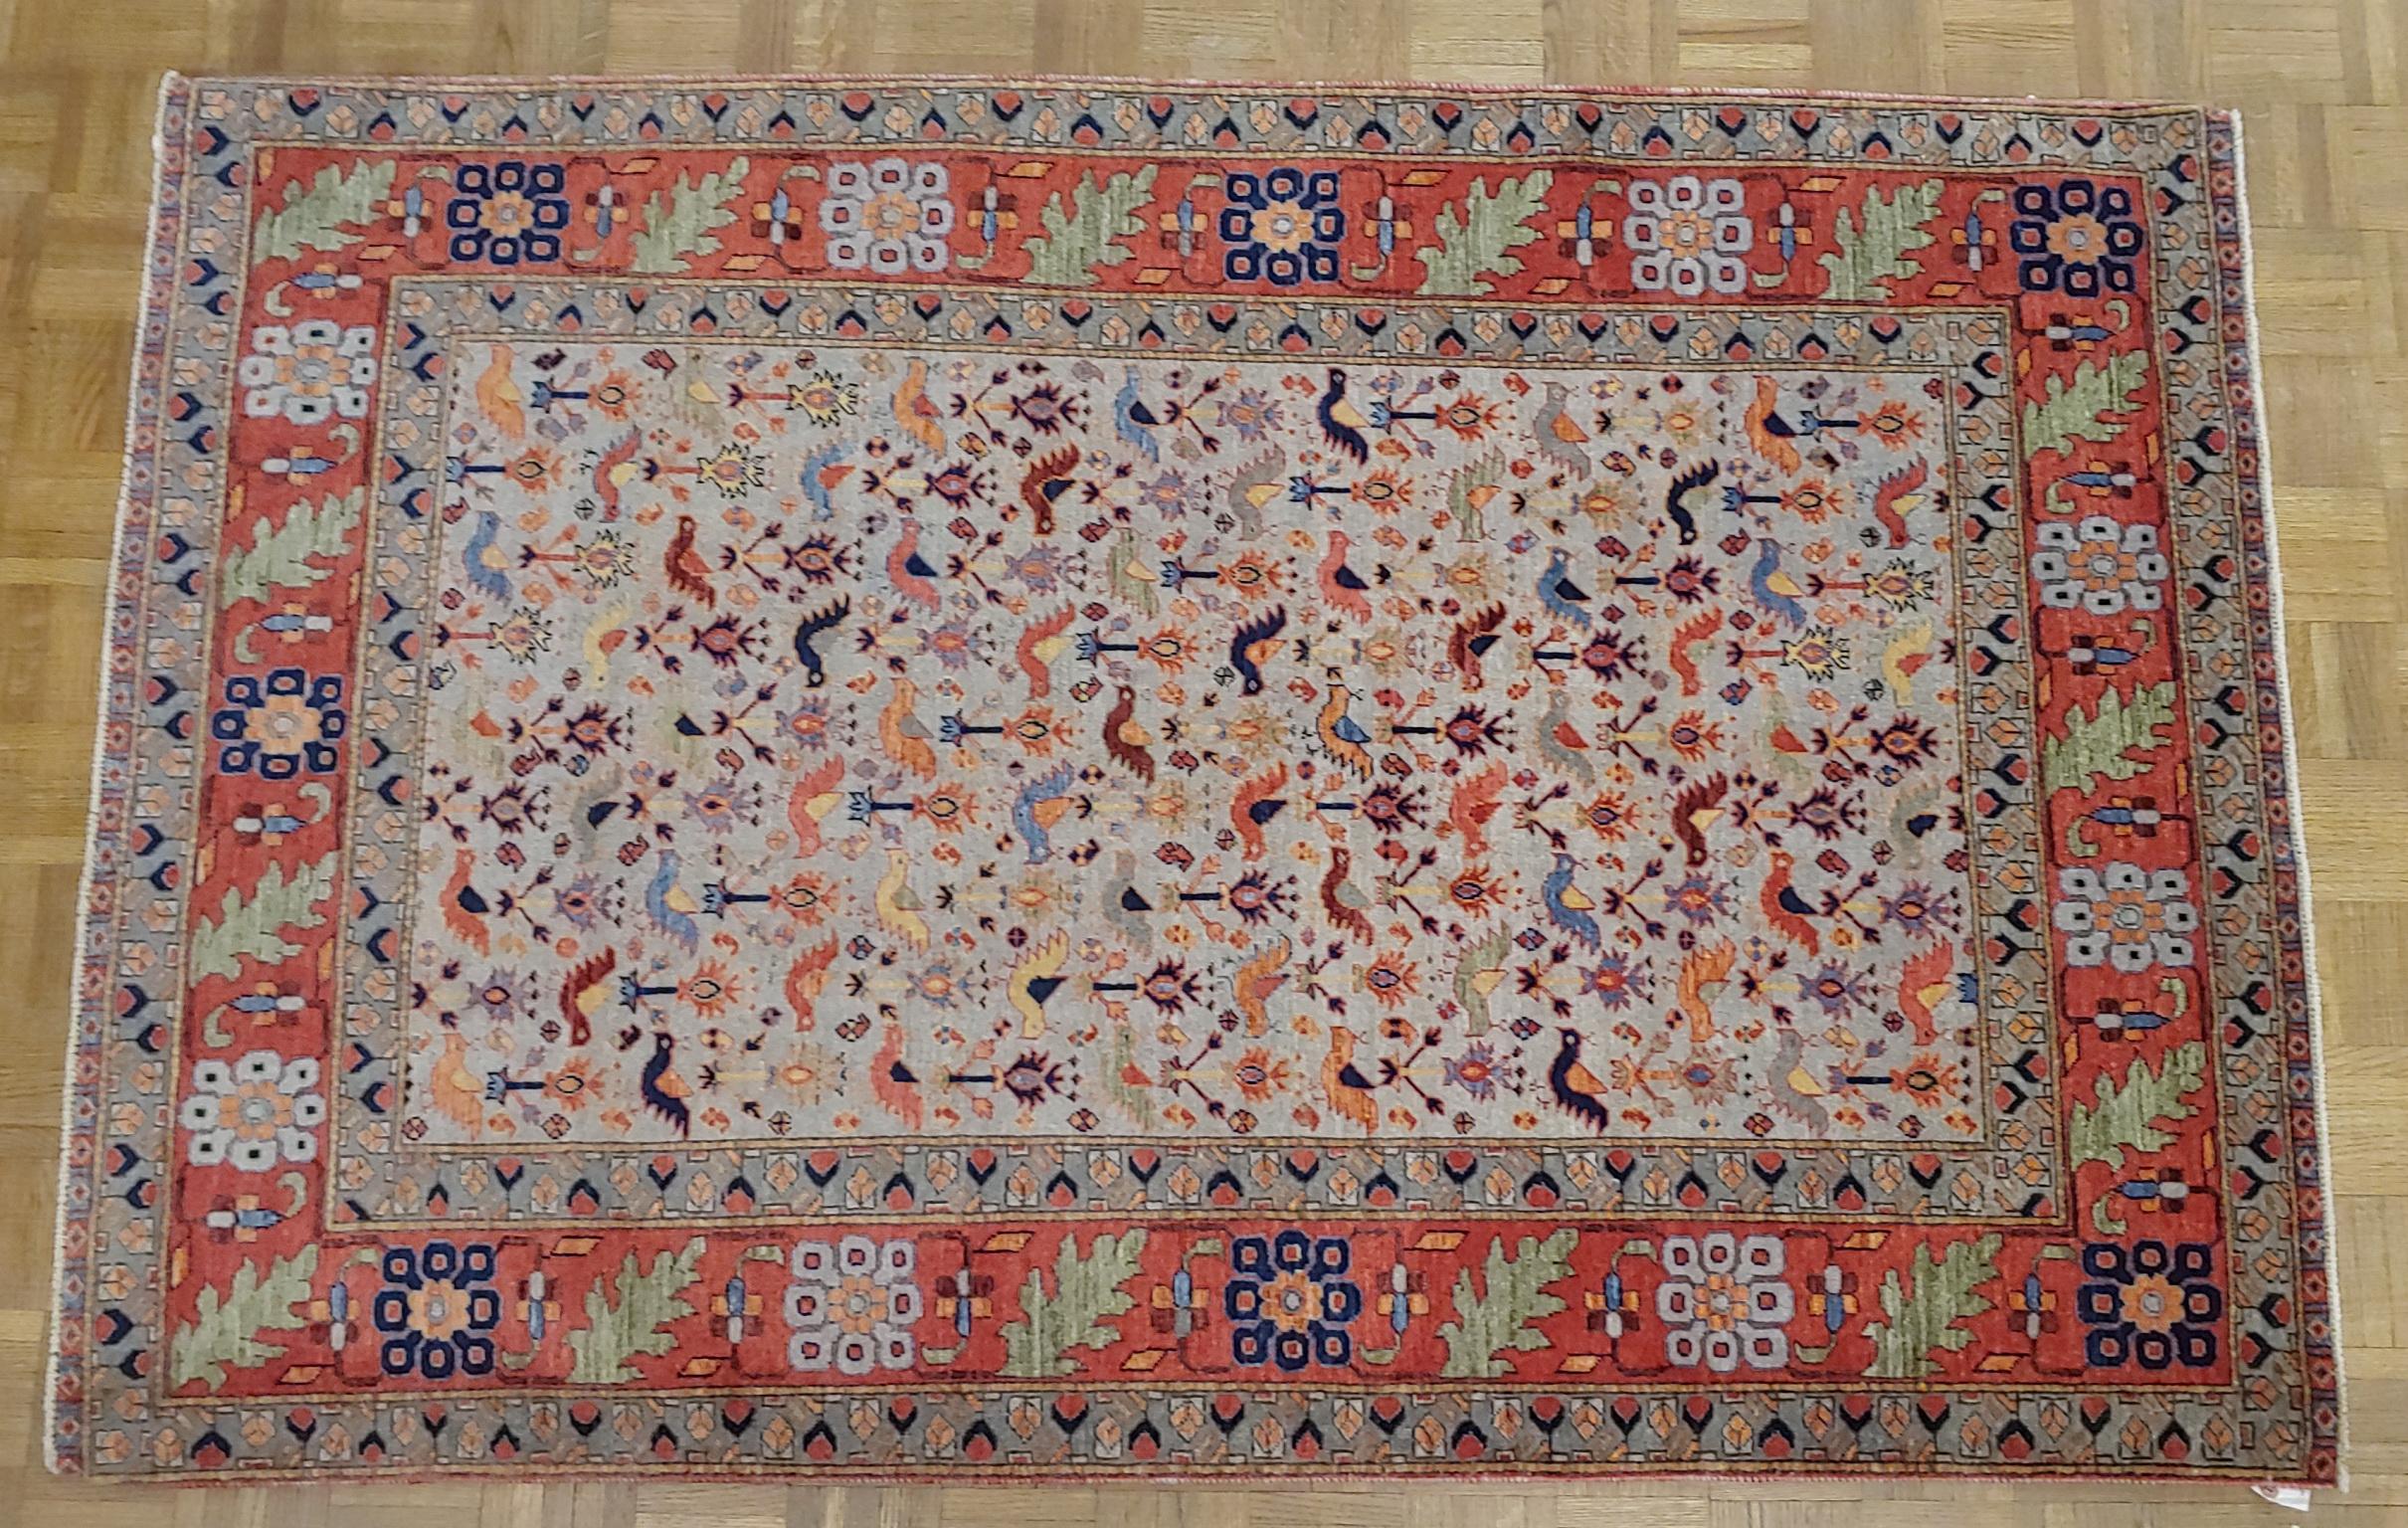 New Rug From Afghanistan, Persian Qashqai-Shiraz Design, Wool, Natural Dyes 4x6  For Sale 2